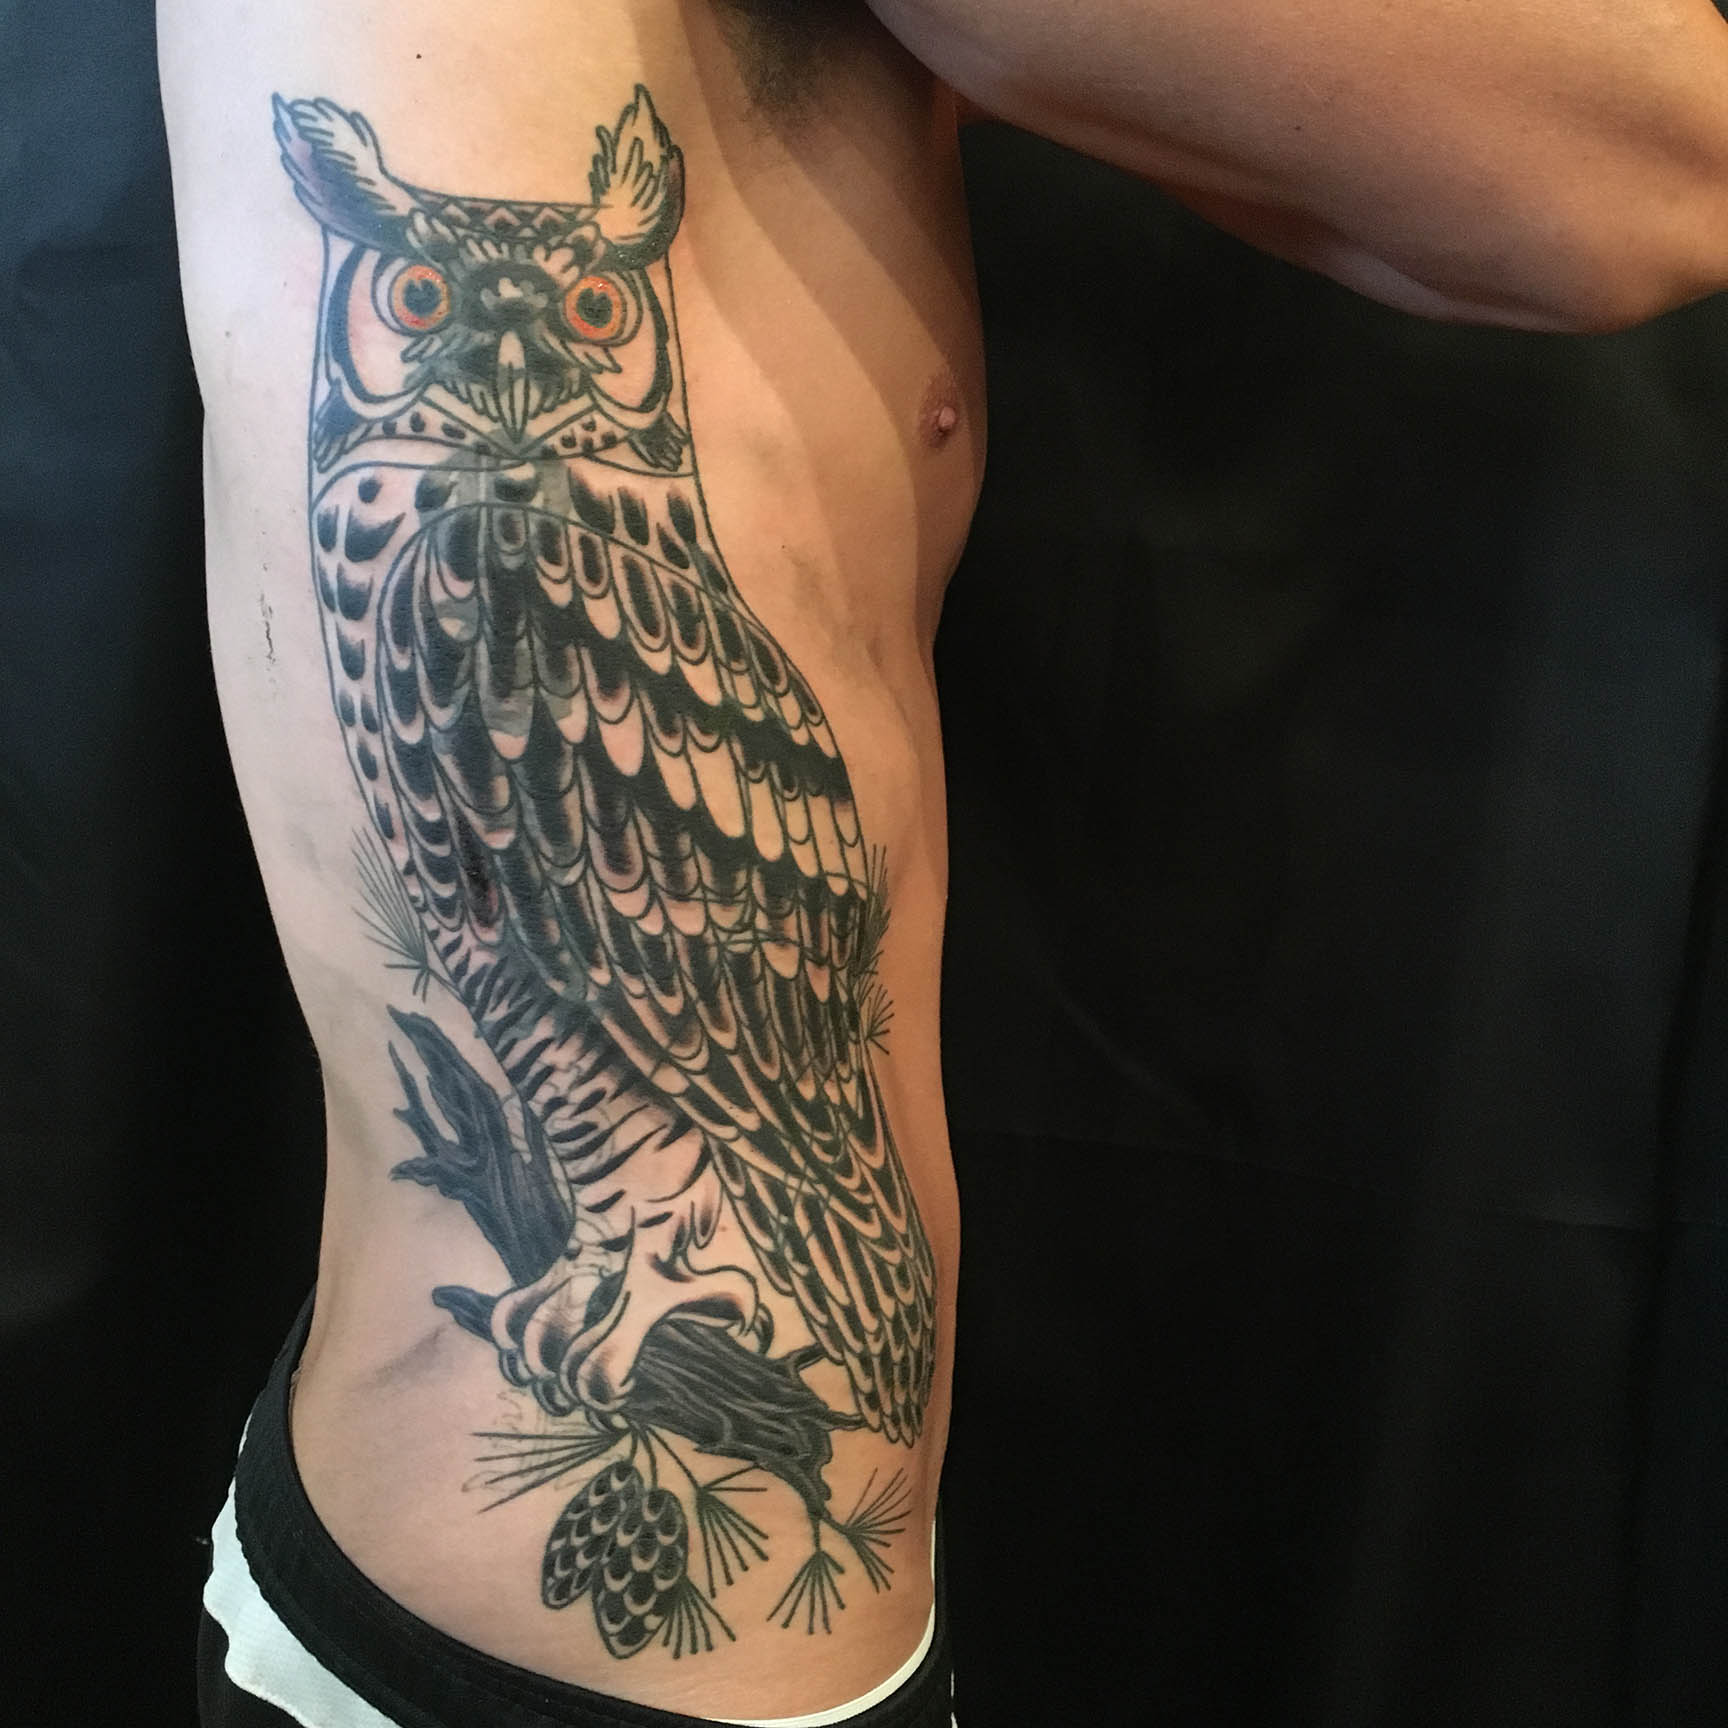 Owl Tattoo Design Ideas and Pictures Page 4 - Tattdiz